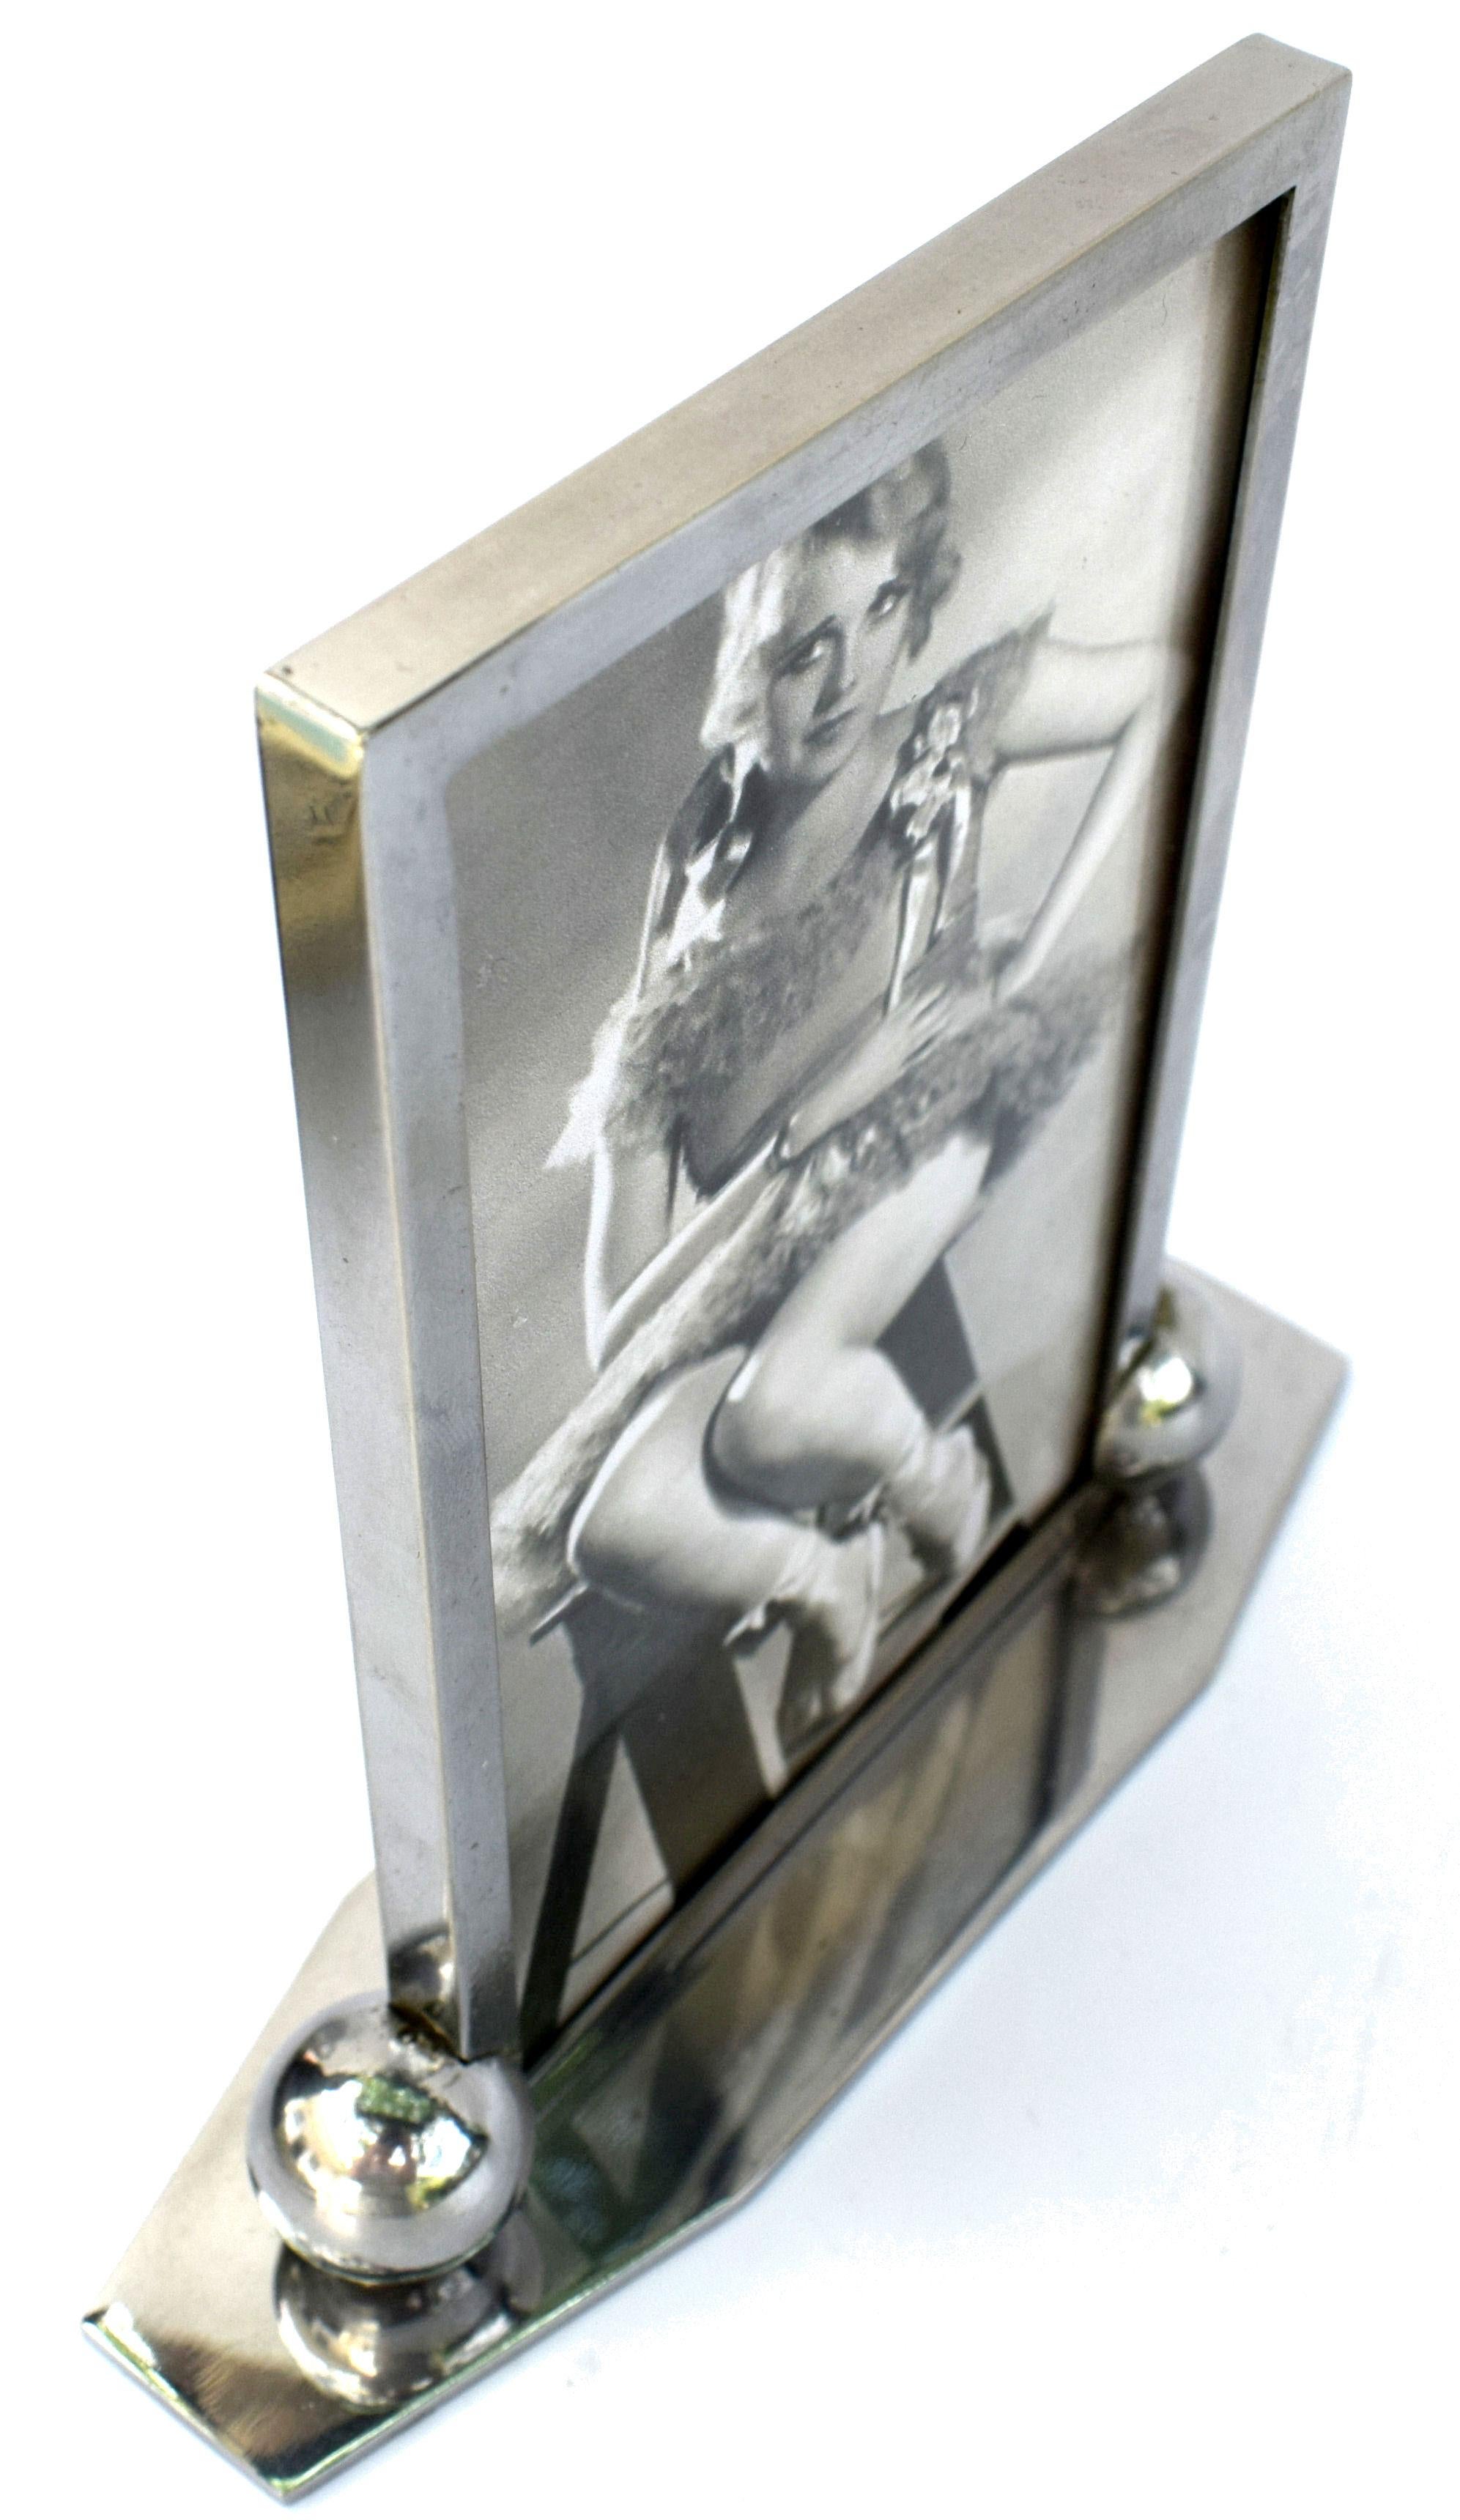 Super stylish 1930s Art Deco modernist picture frame in chrome and glass. The frame has two pieces of glass which slot into the chrome stand allows an image to be displayed both sides of the free standing frame. Ideal size and perfect for any